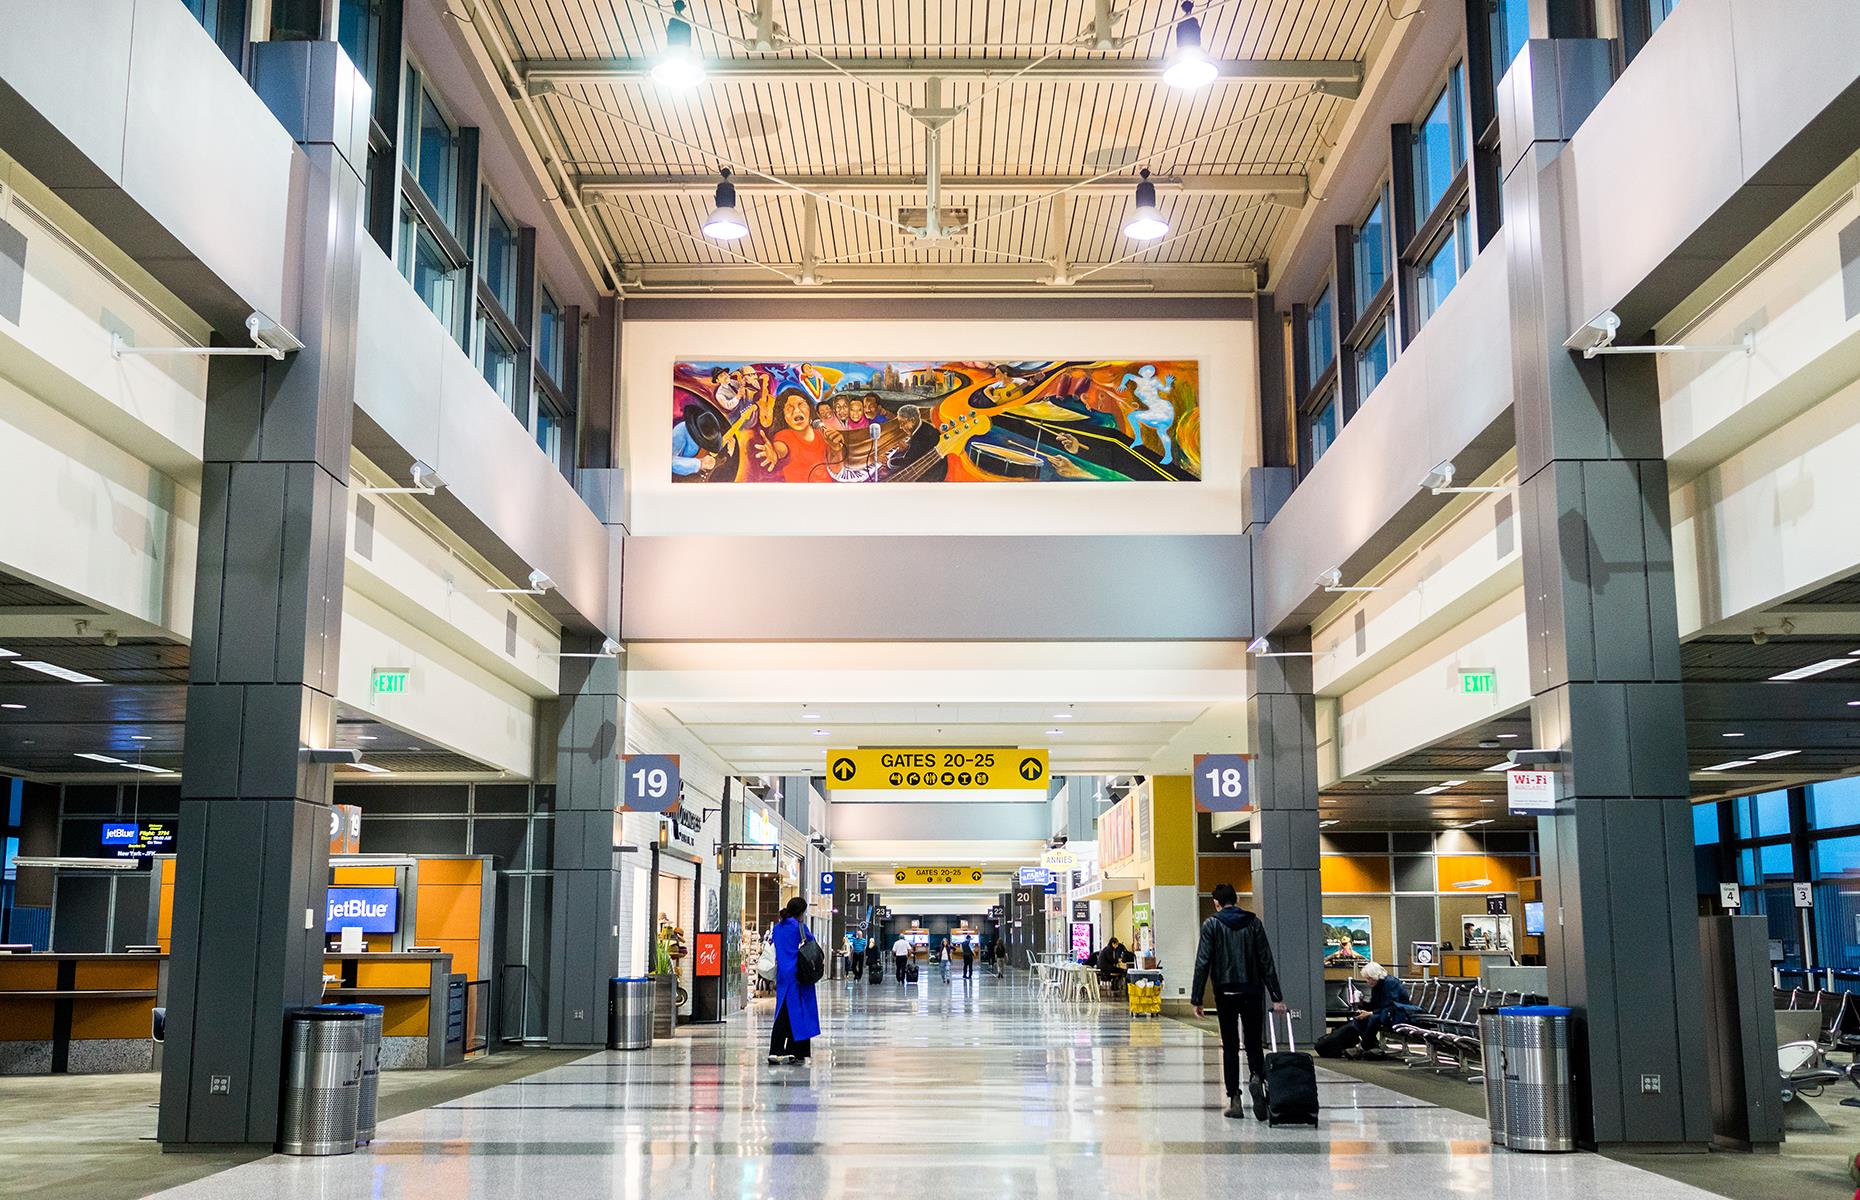 <p>Also in the state of Texas, Austin-Bergstrom International Airport finished substantial renovation work in February 2019, which may have helped it increase its satisfaction score to 804 in the 2020 rankings. Reflecting Austin's young and eclectic style, passengers can find a live music stage and art installations in the main terminal.</p>